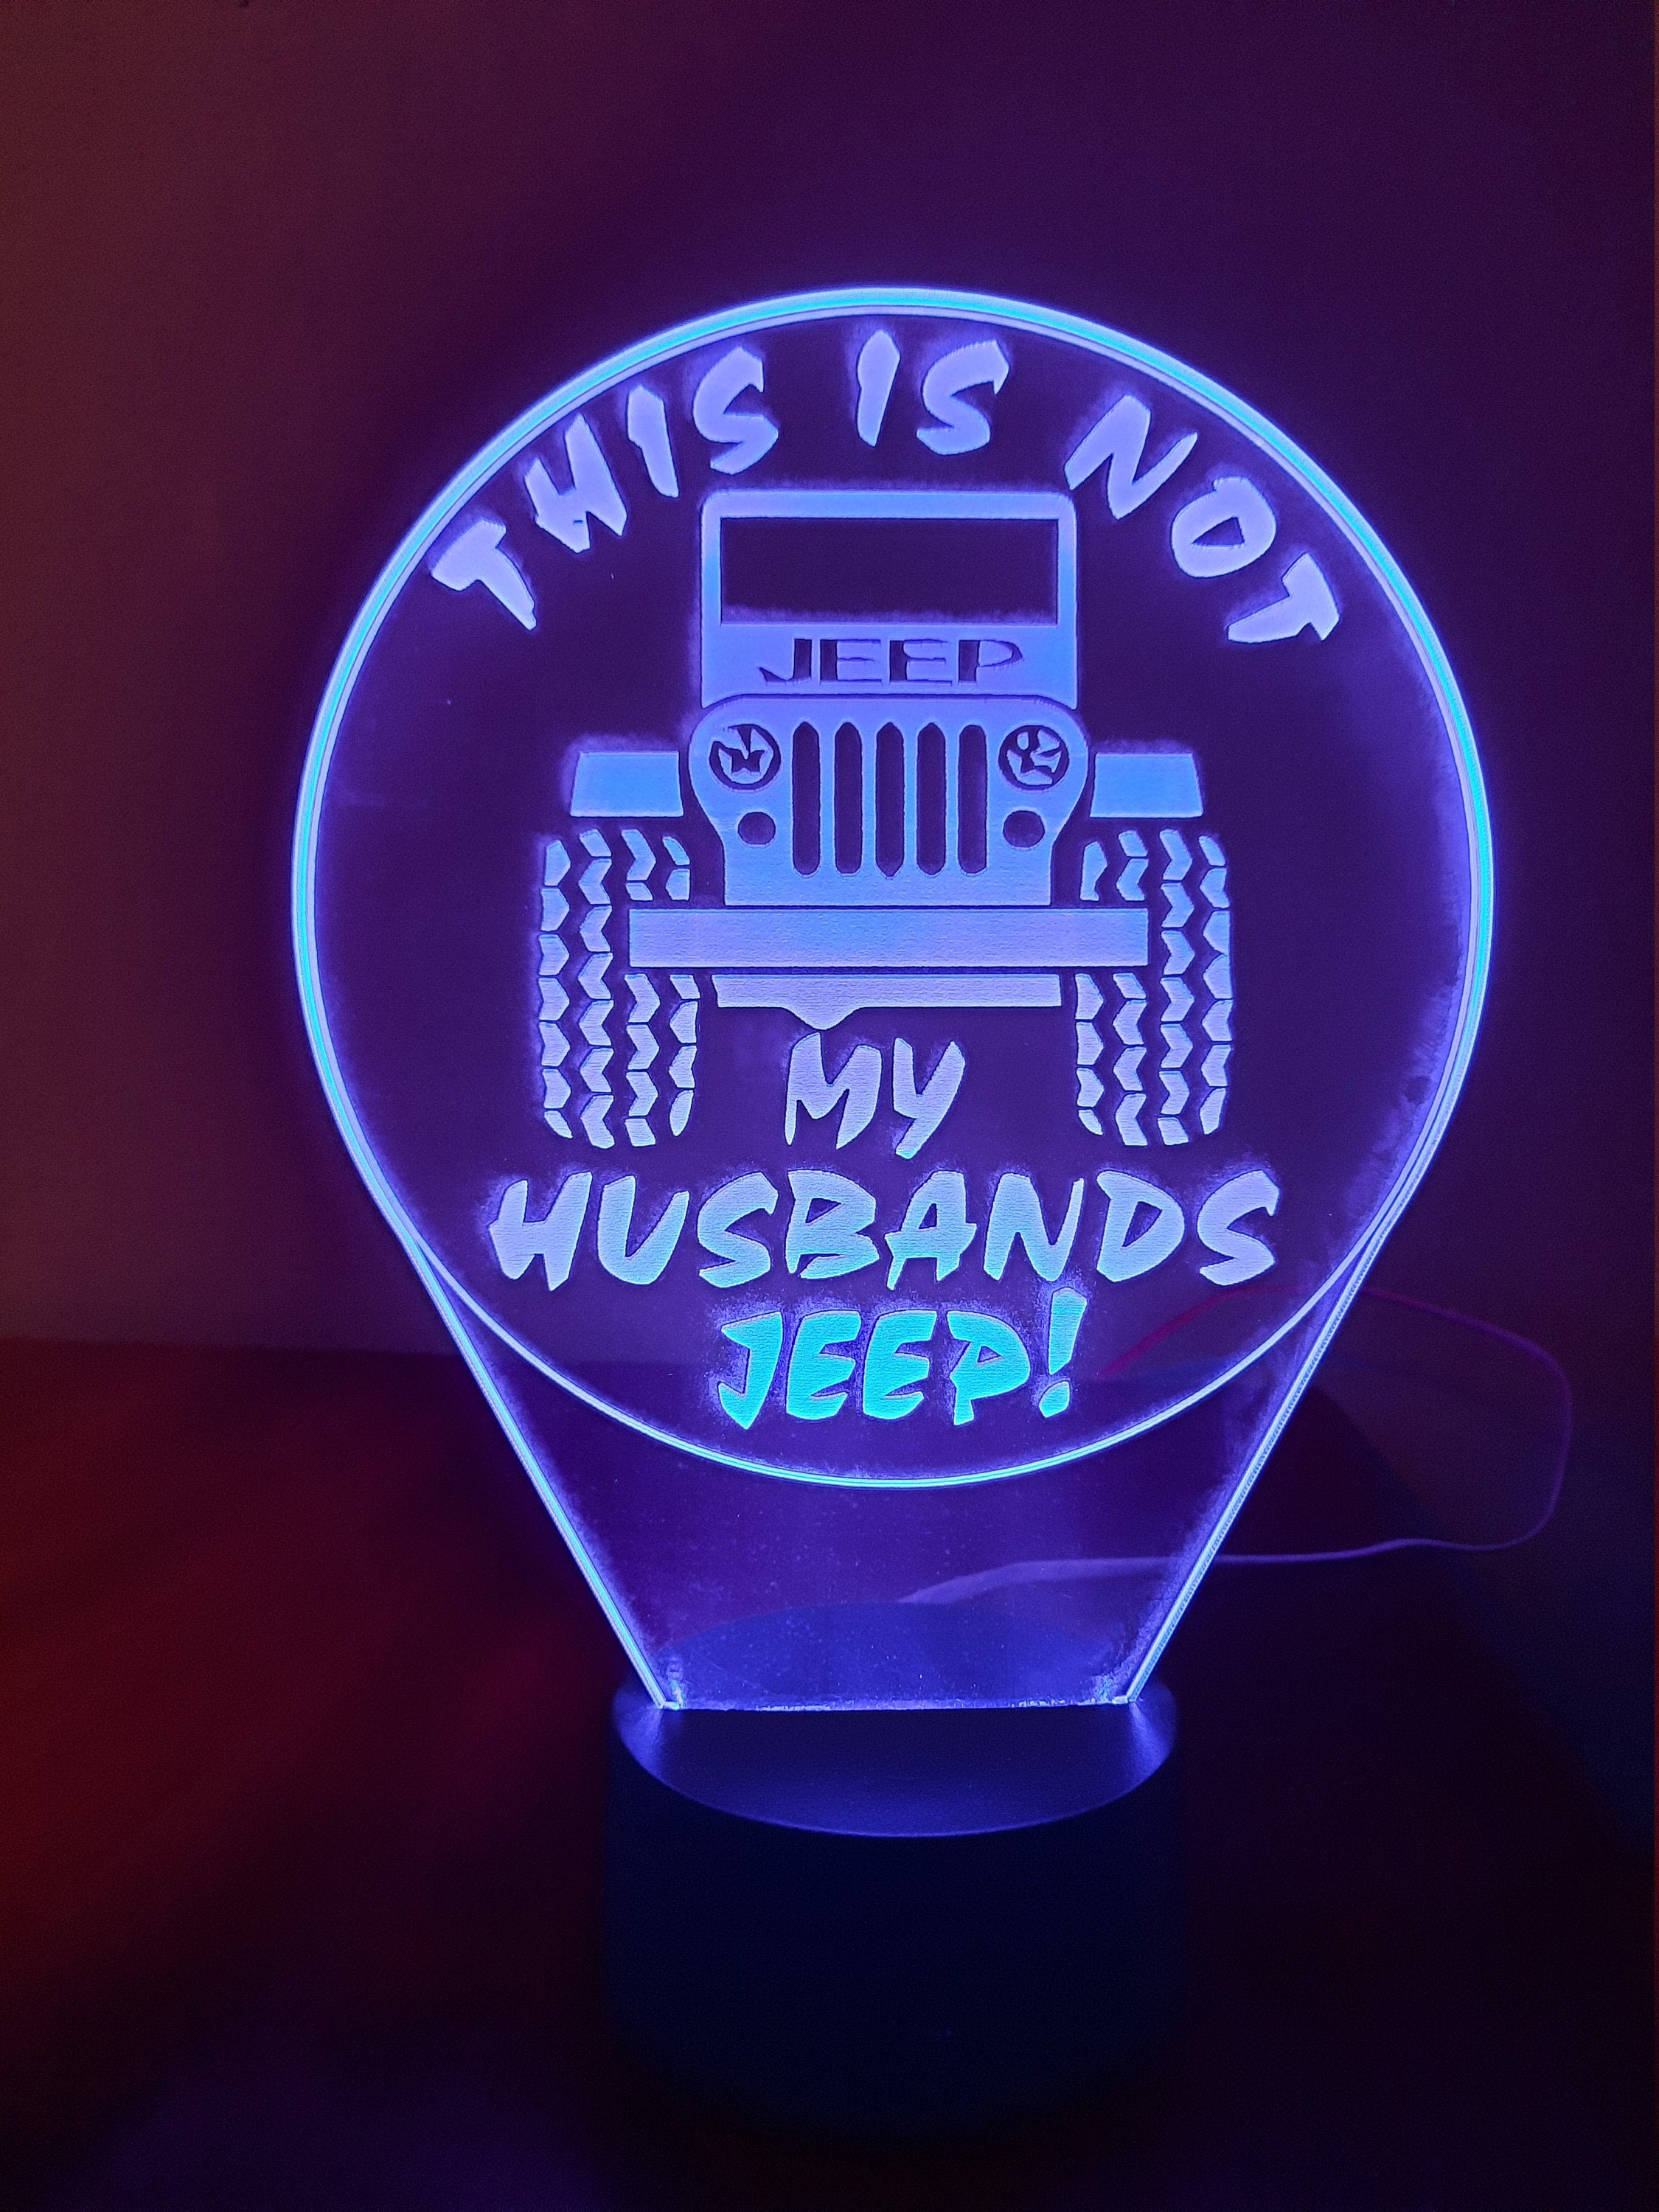 Awesome "This is NOT my Husbands Jeep" LED Lamp (1260)